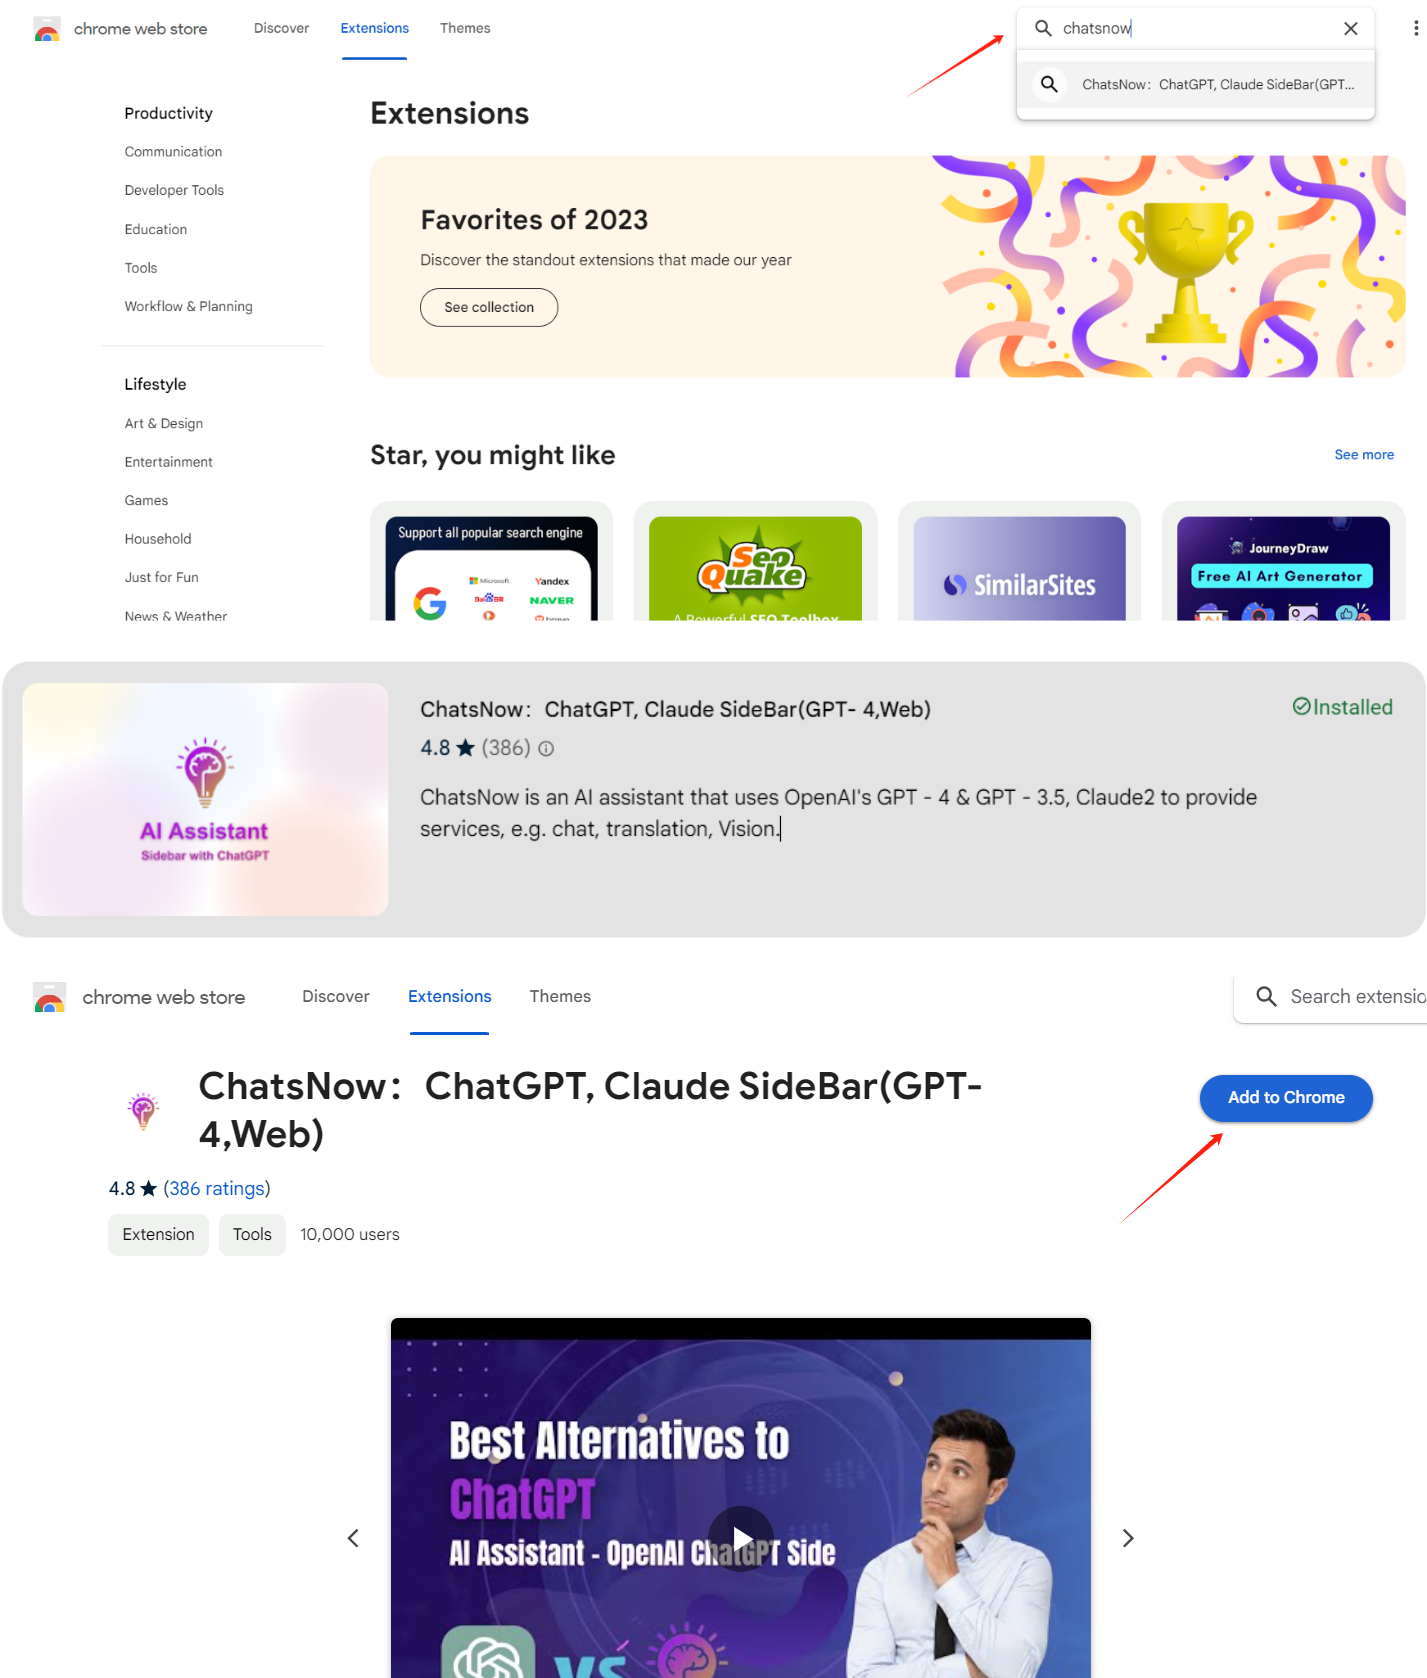 How to Use ChatsNow?